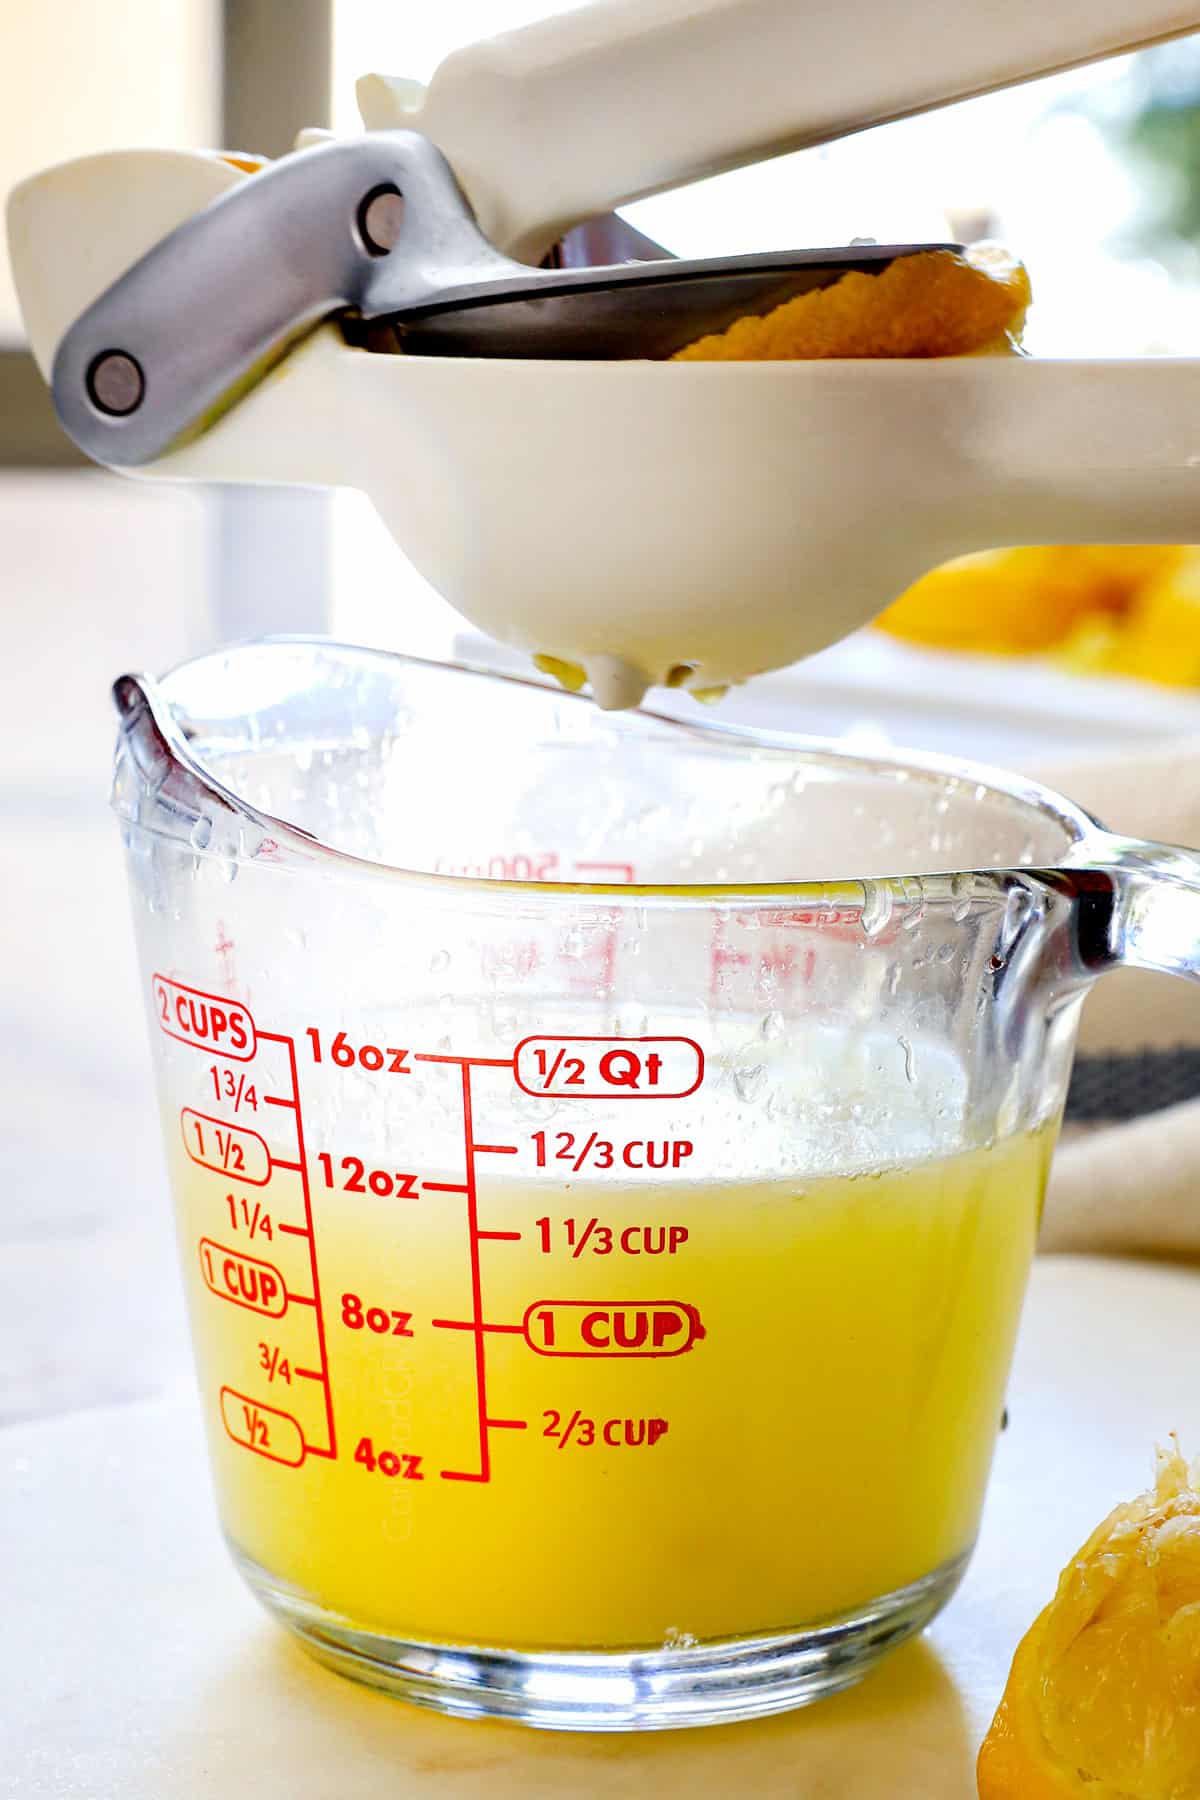 showing how to make homemade lemonade by juicing lemons into a liquid measuring cup